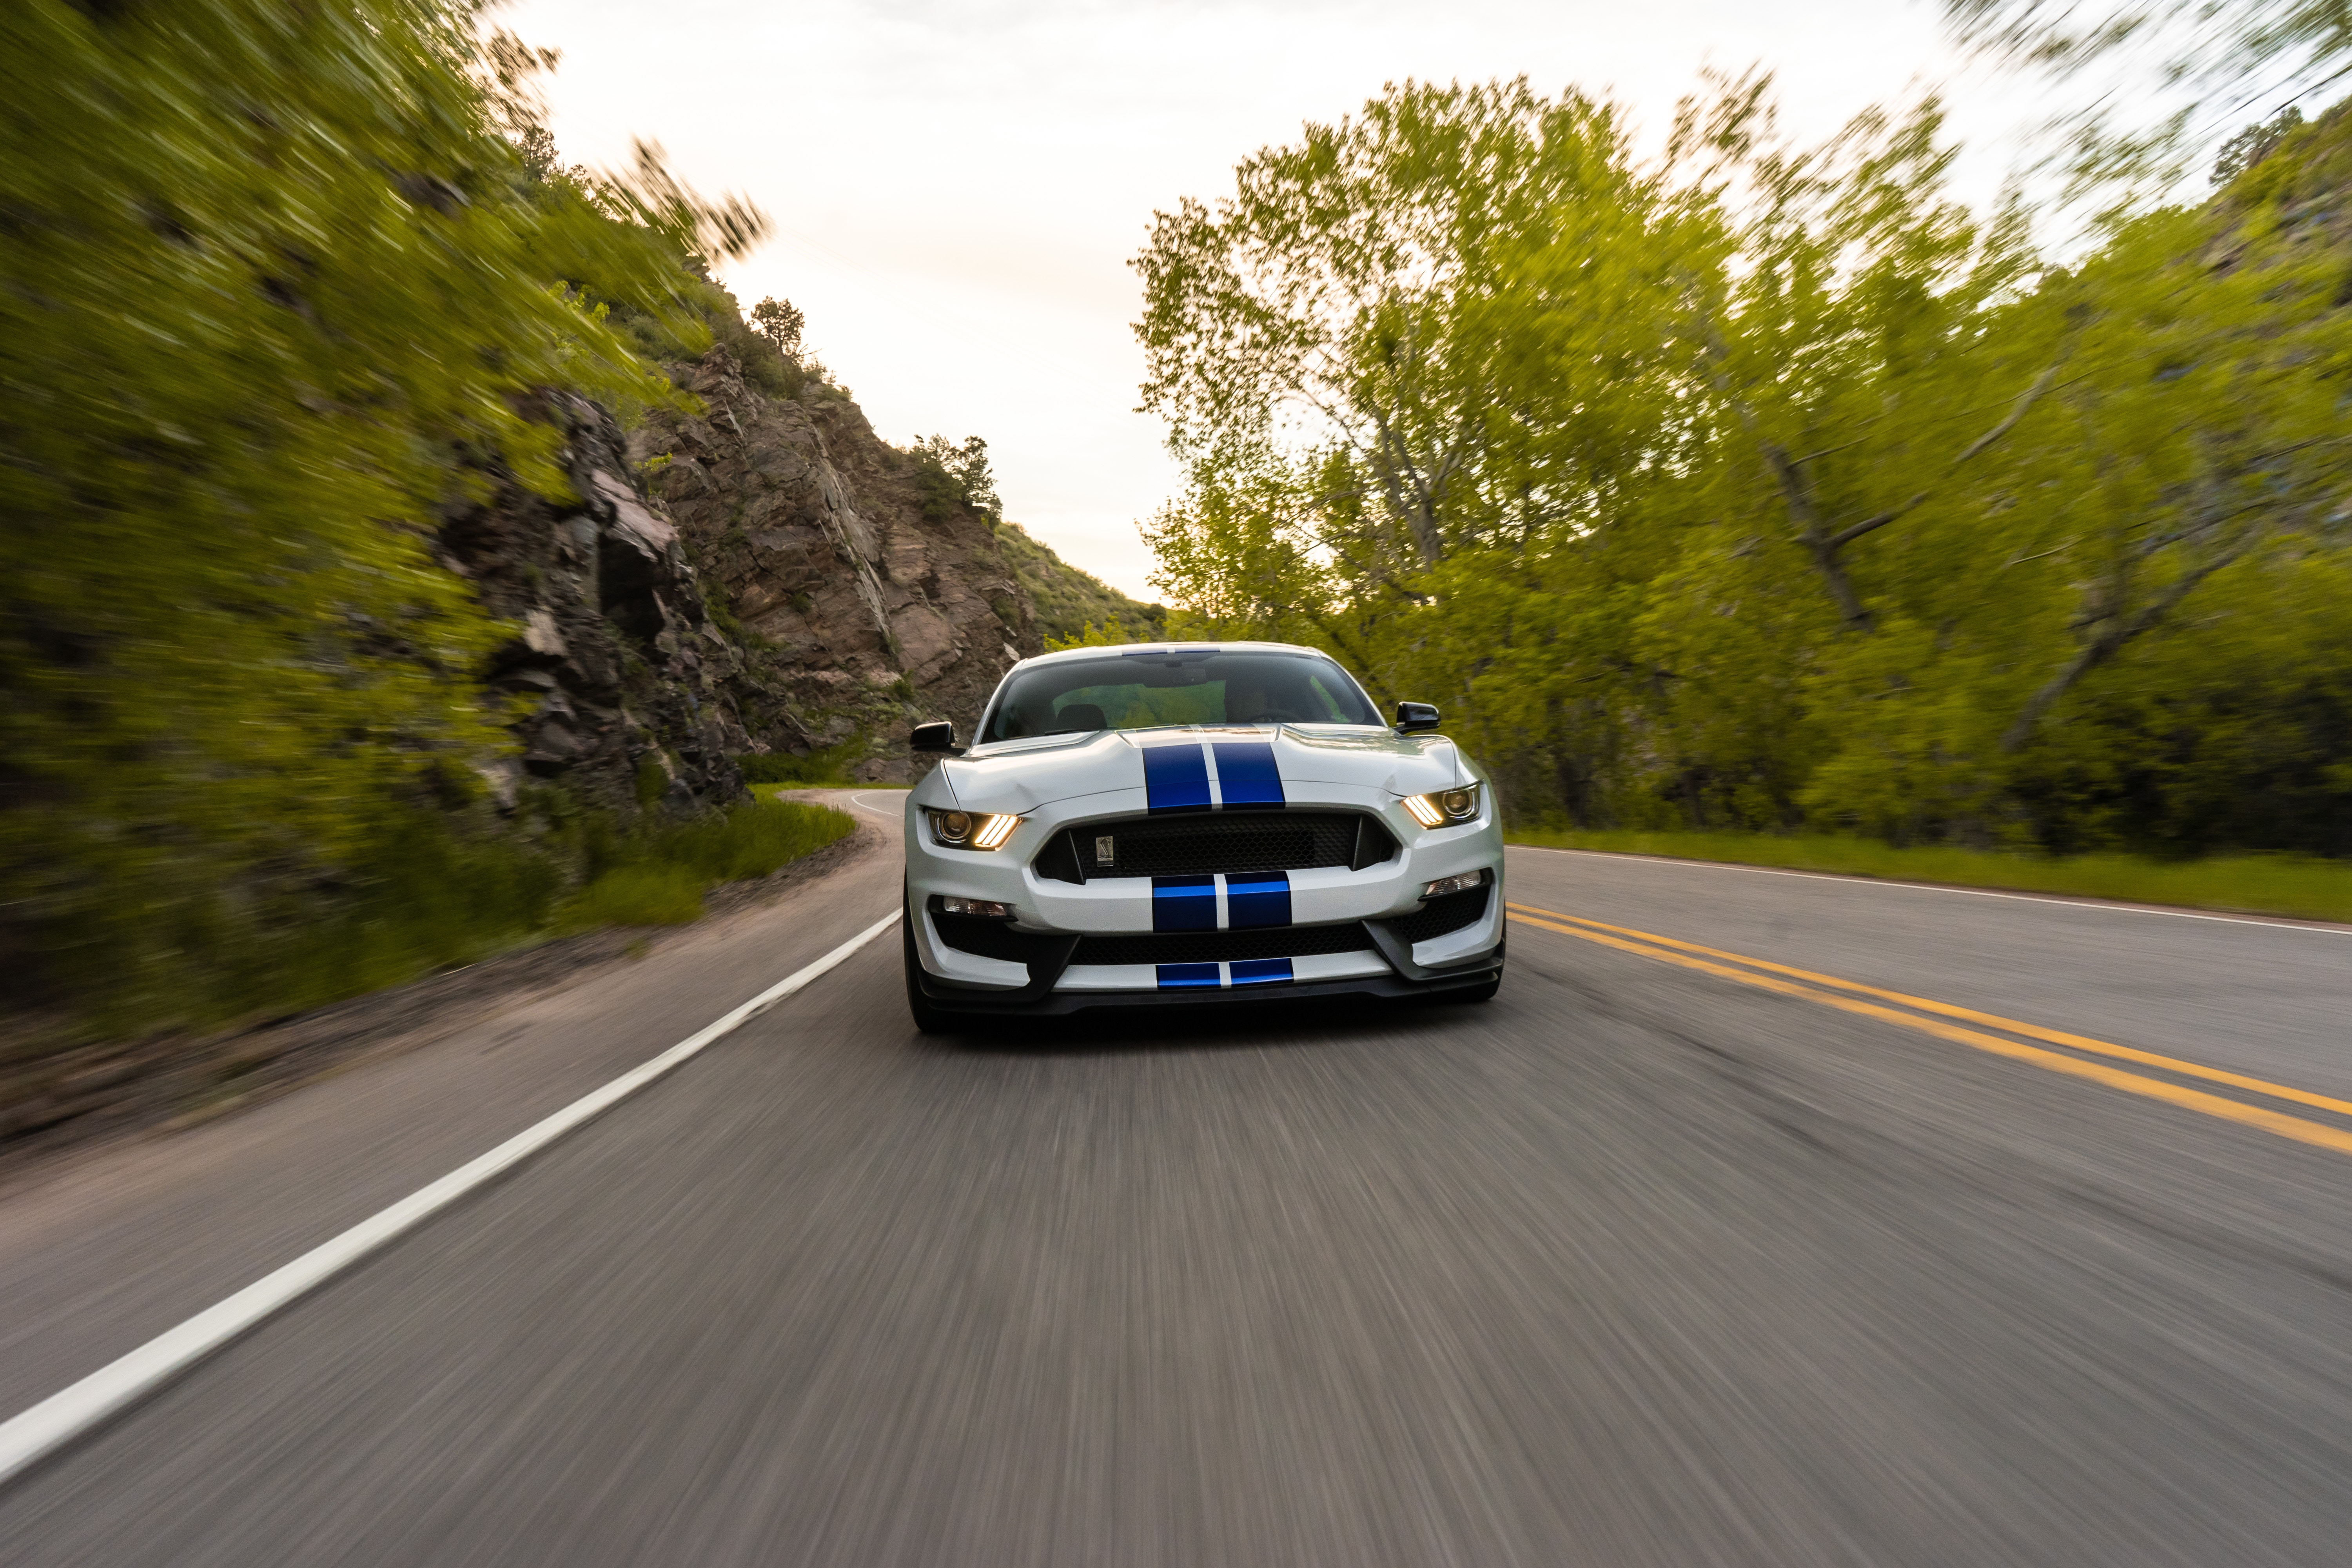 cars, sports car, ford mustang gt350, car, sports, ford, road, machine, speed iphone wallpaper